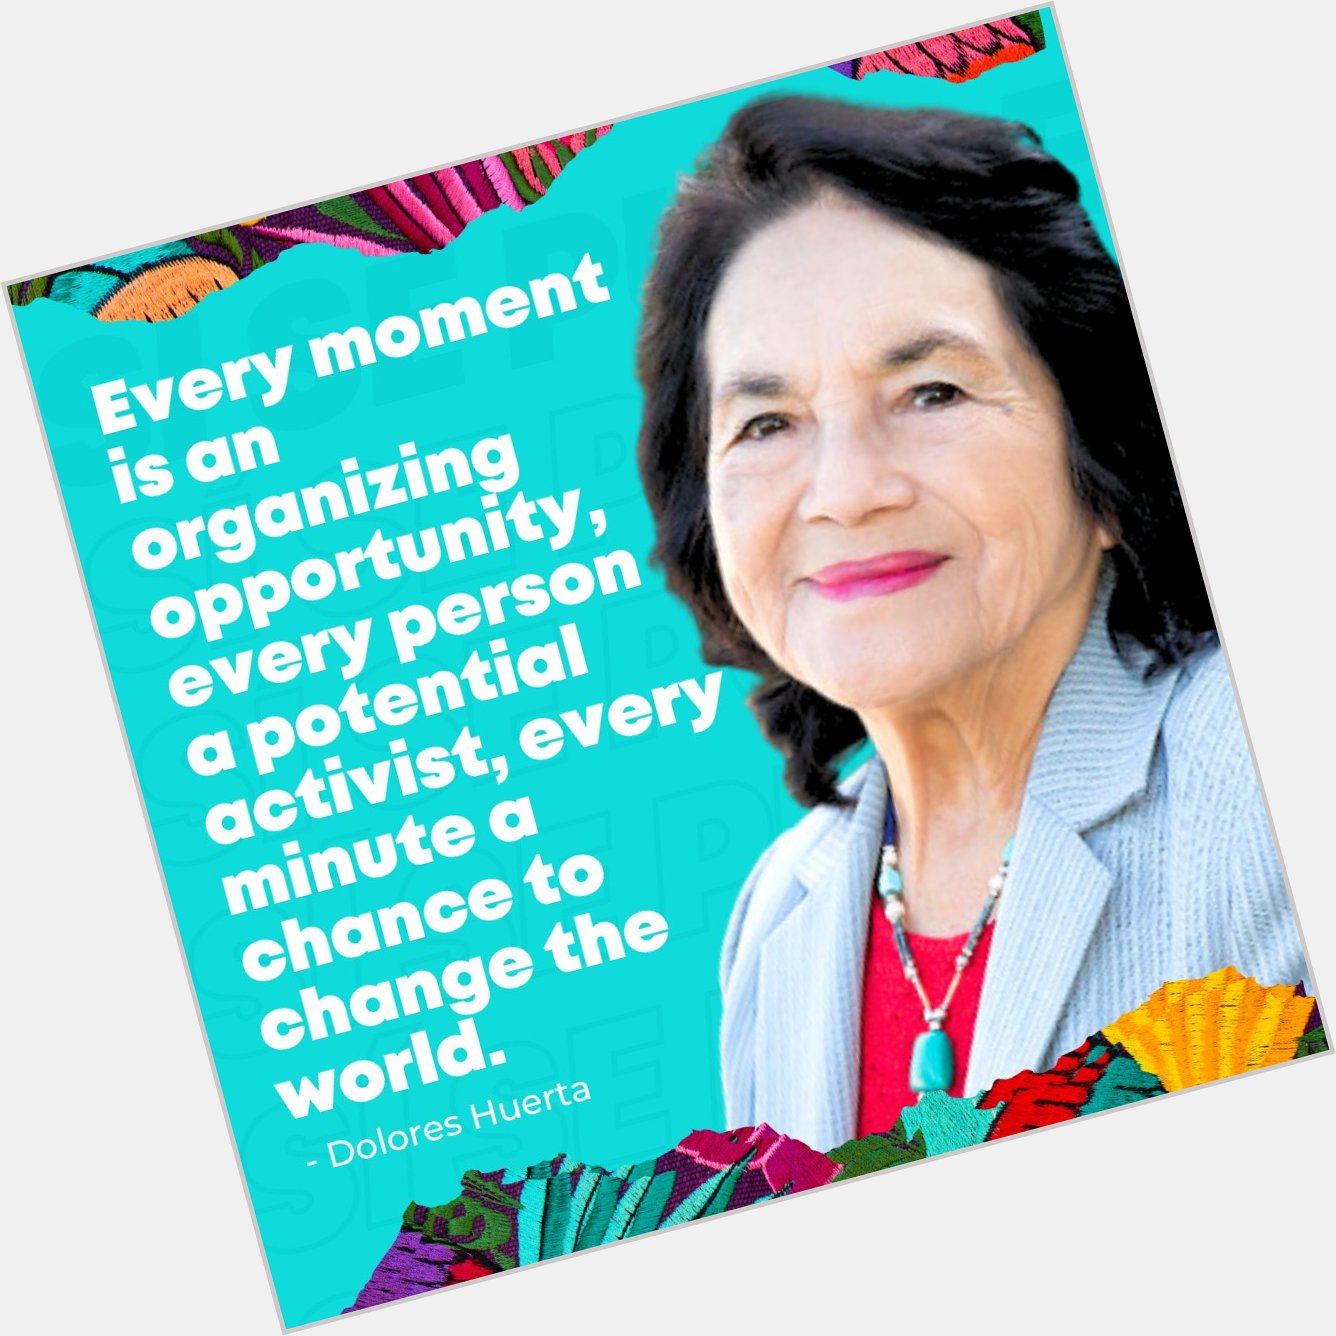 Happy birthday to Dolores Huerta, an amazing organizer and activist and longtime board member 